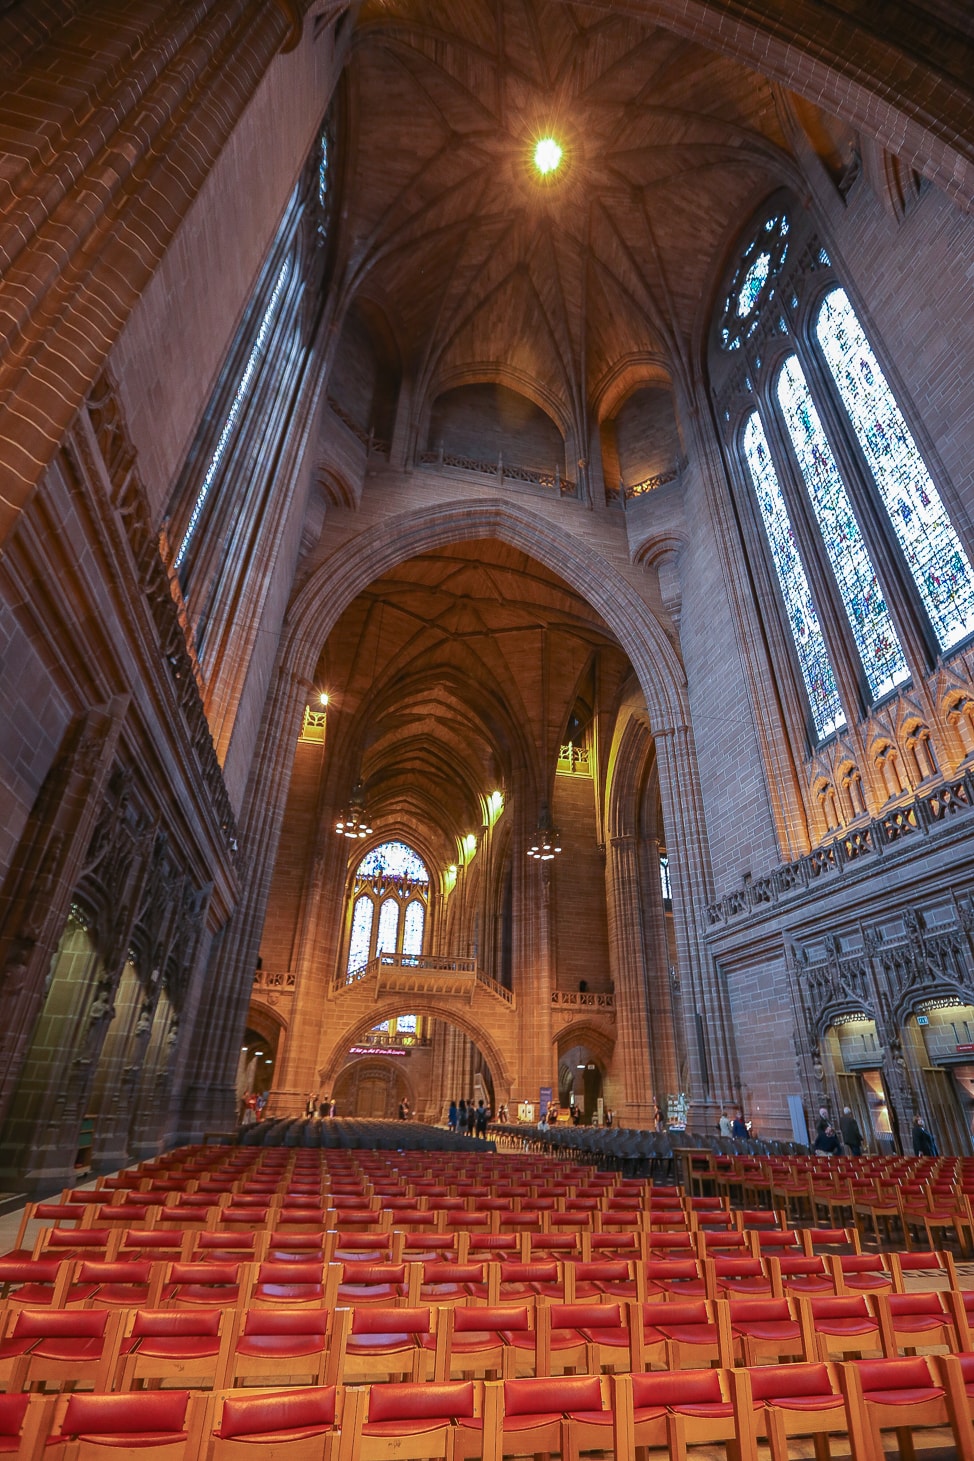 Liverpool Cathedral, one of England's relics that survived two world wars, is one of the most spectacular buildings in the world and well worth a visit if you're passing through the UK.